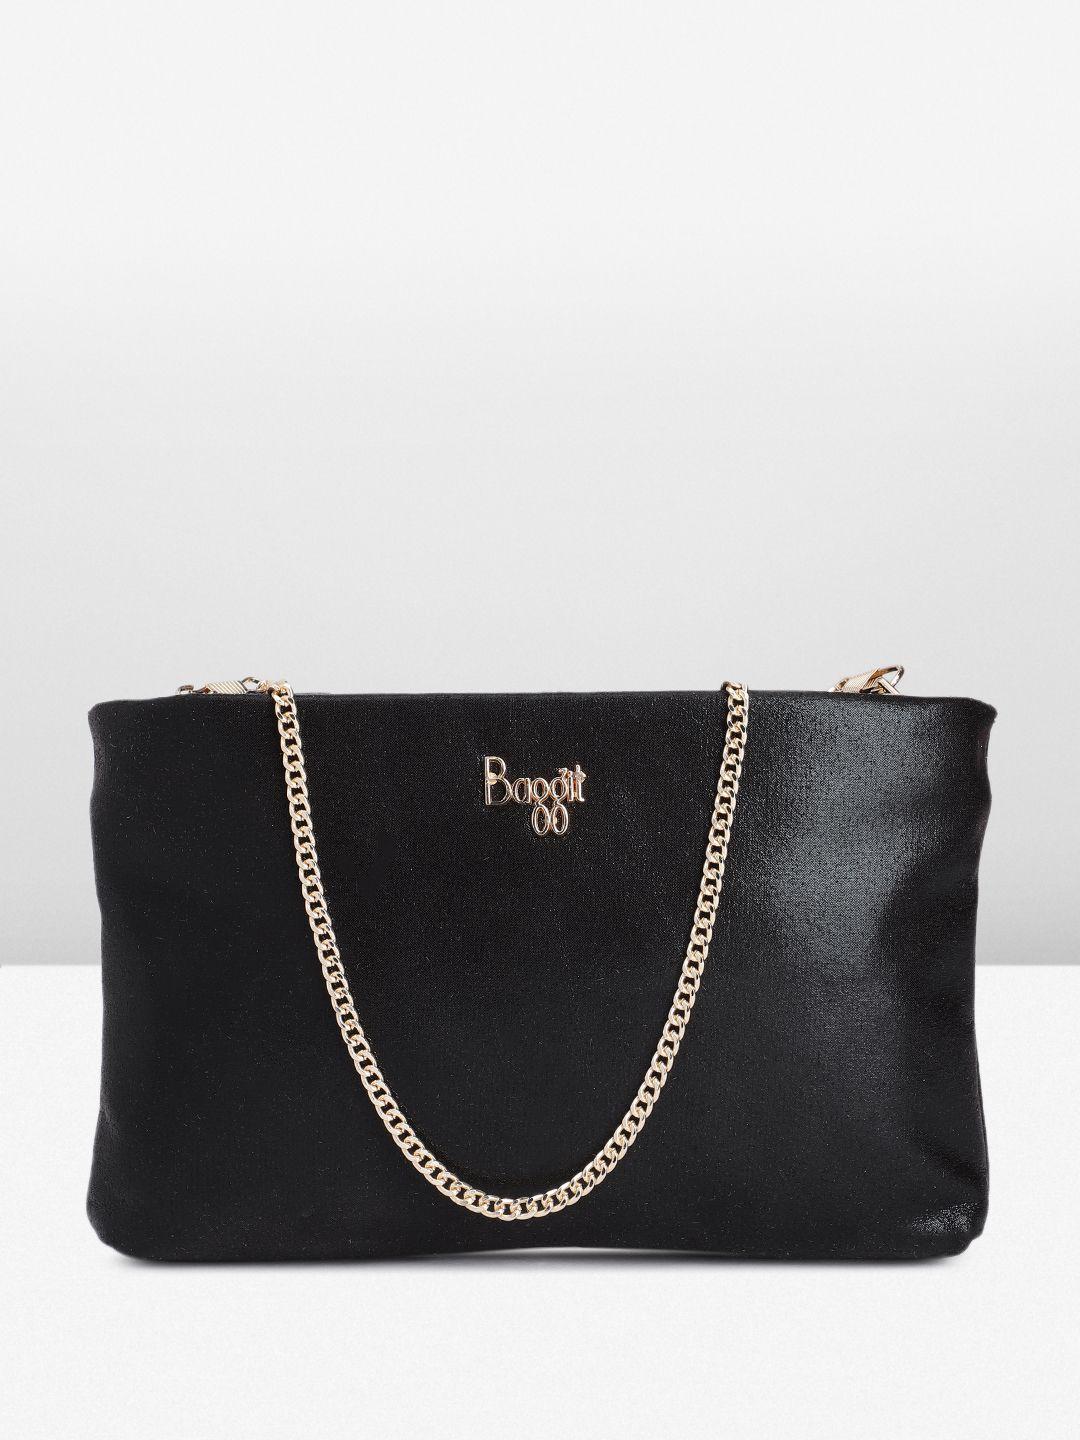 baggit foldover clutch with sheen finish